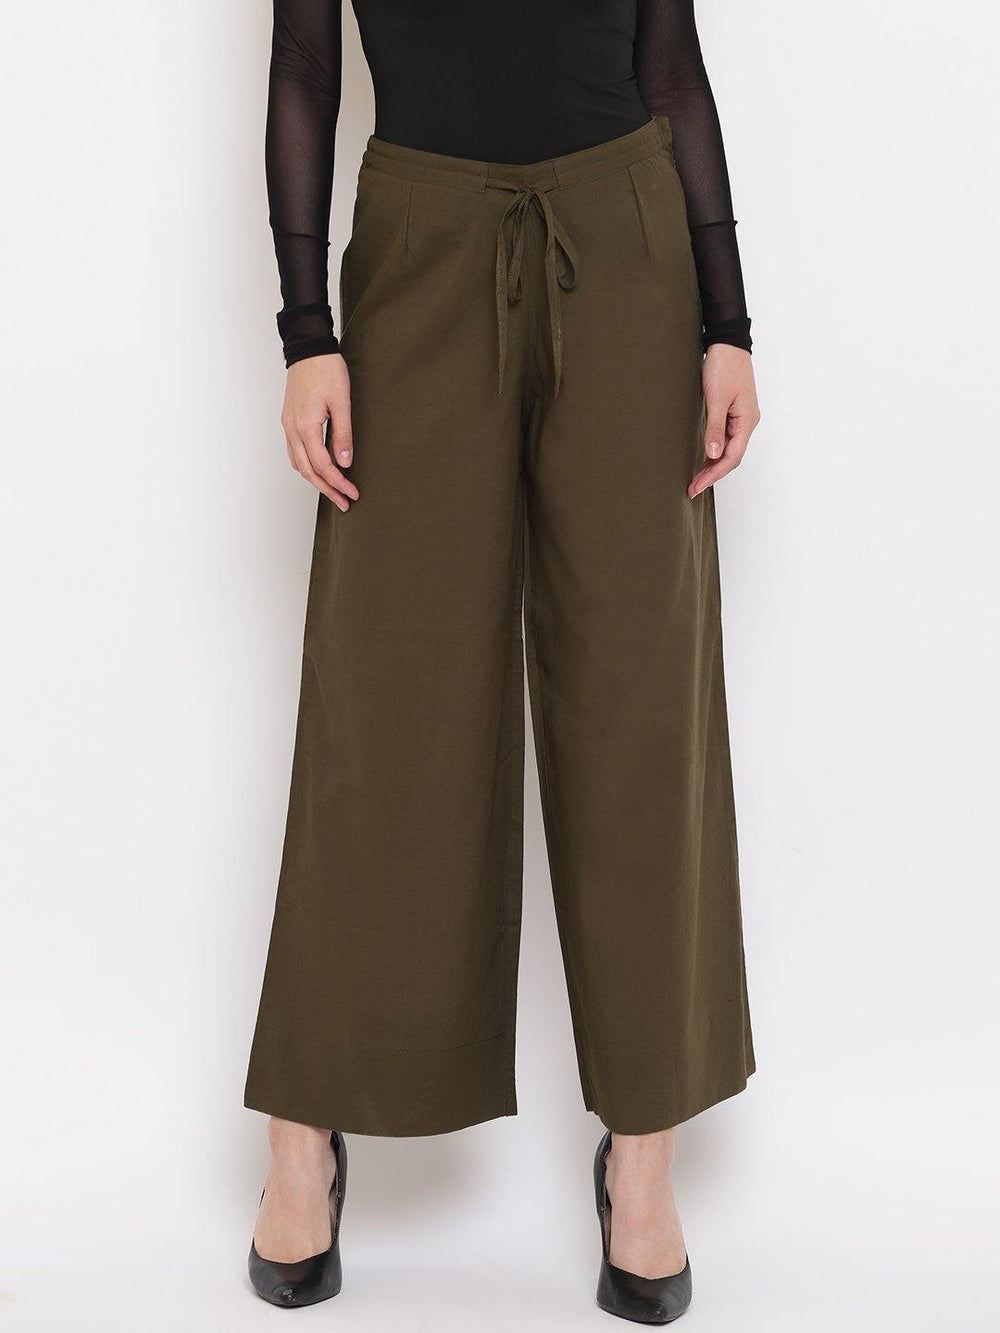 olive green pure cotton palazzo pant btm045-2